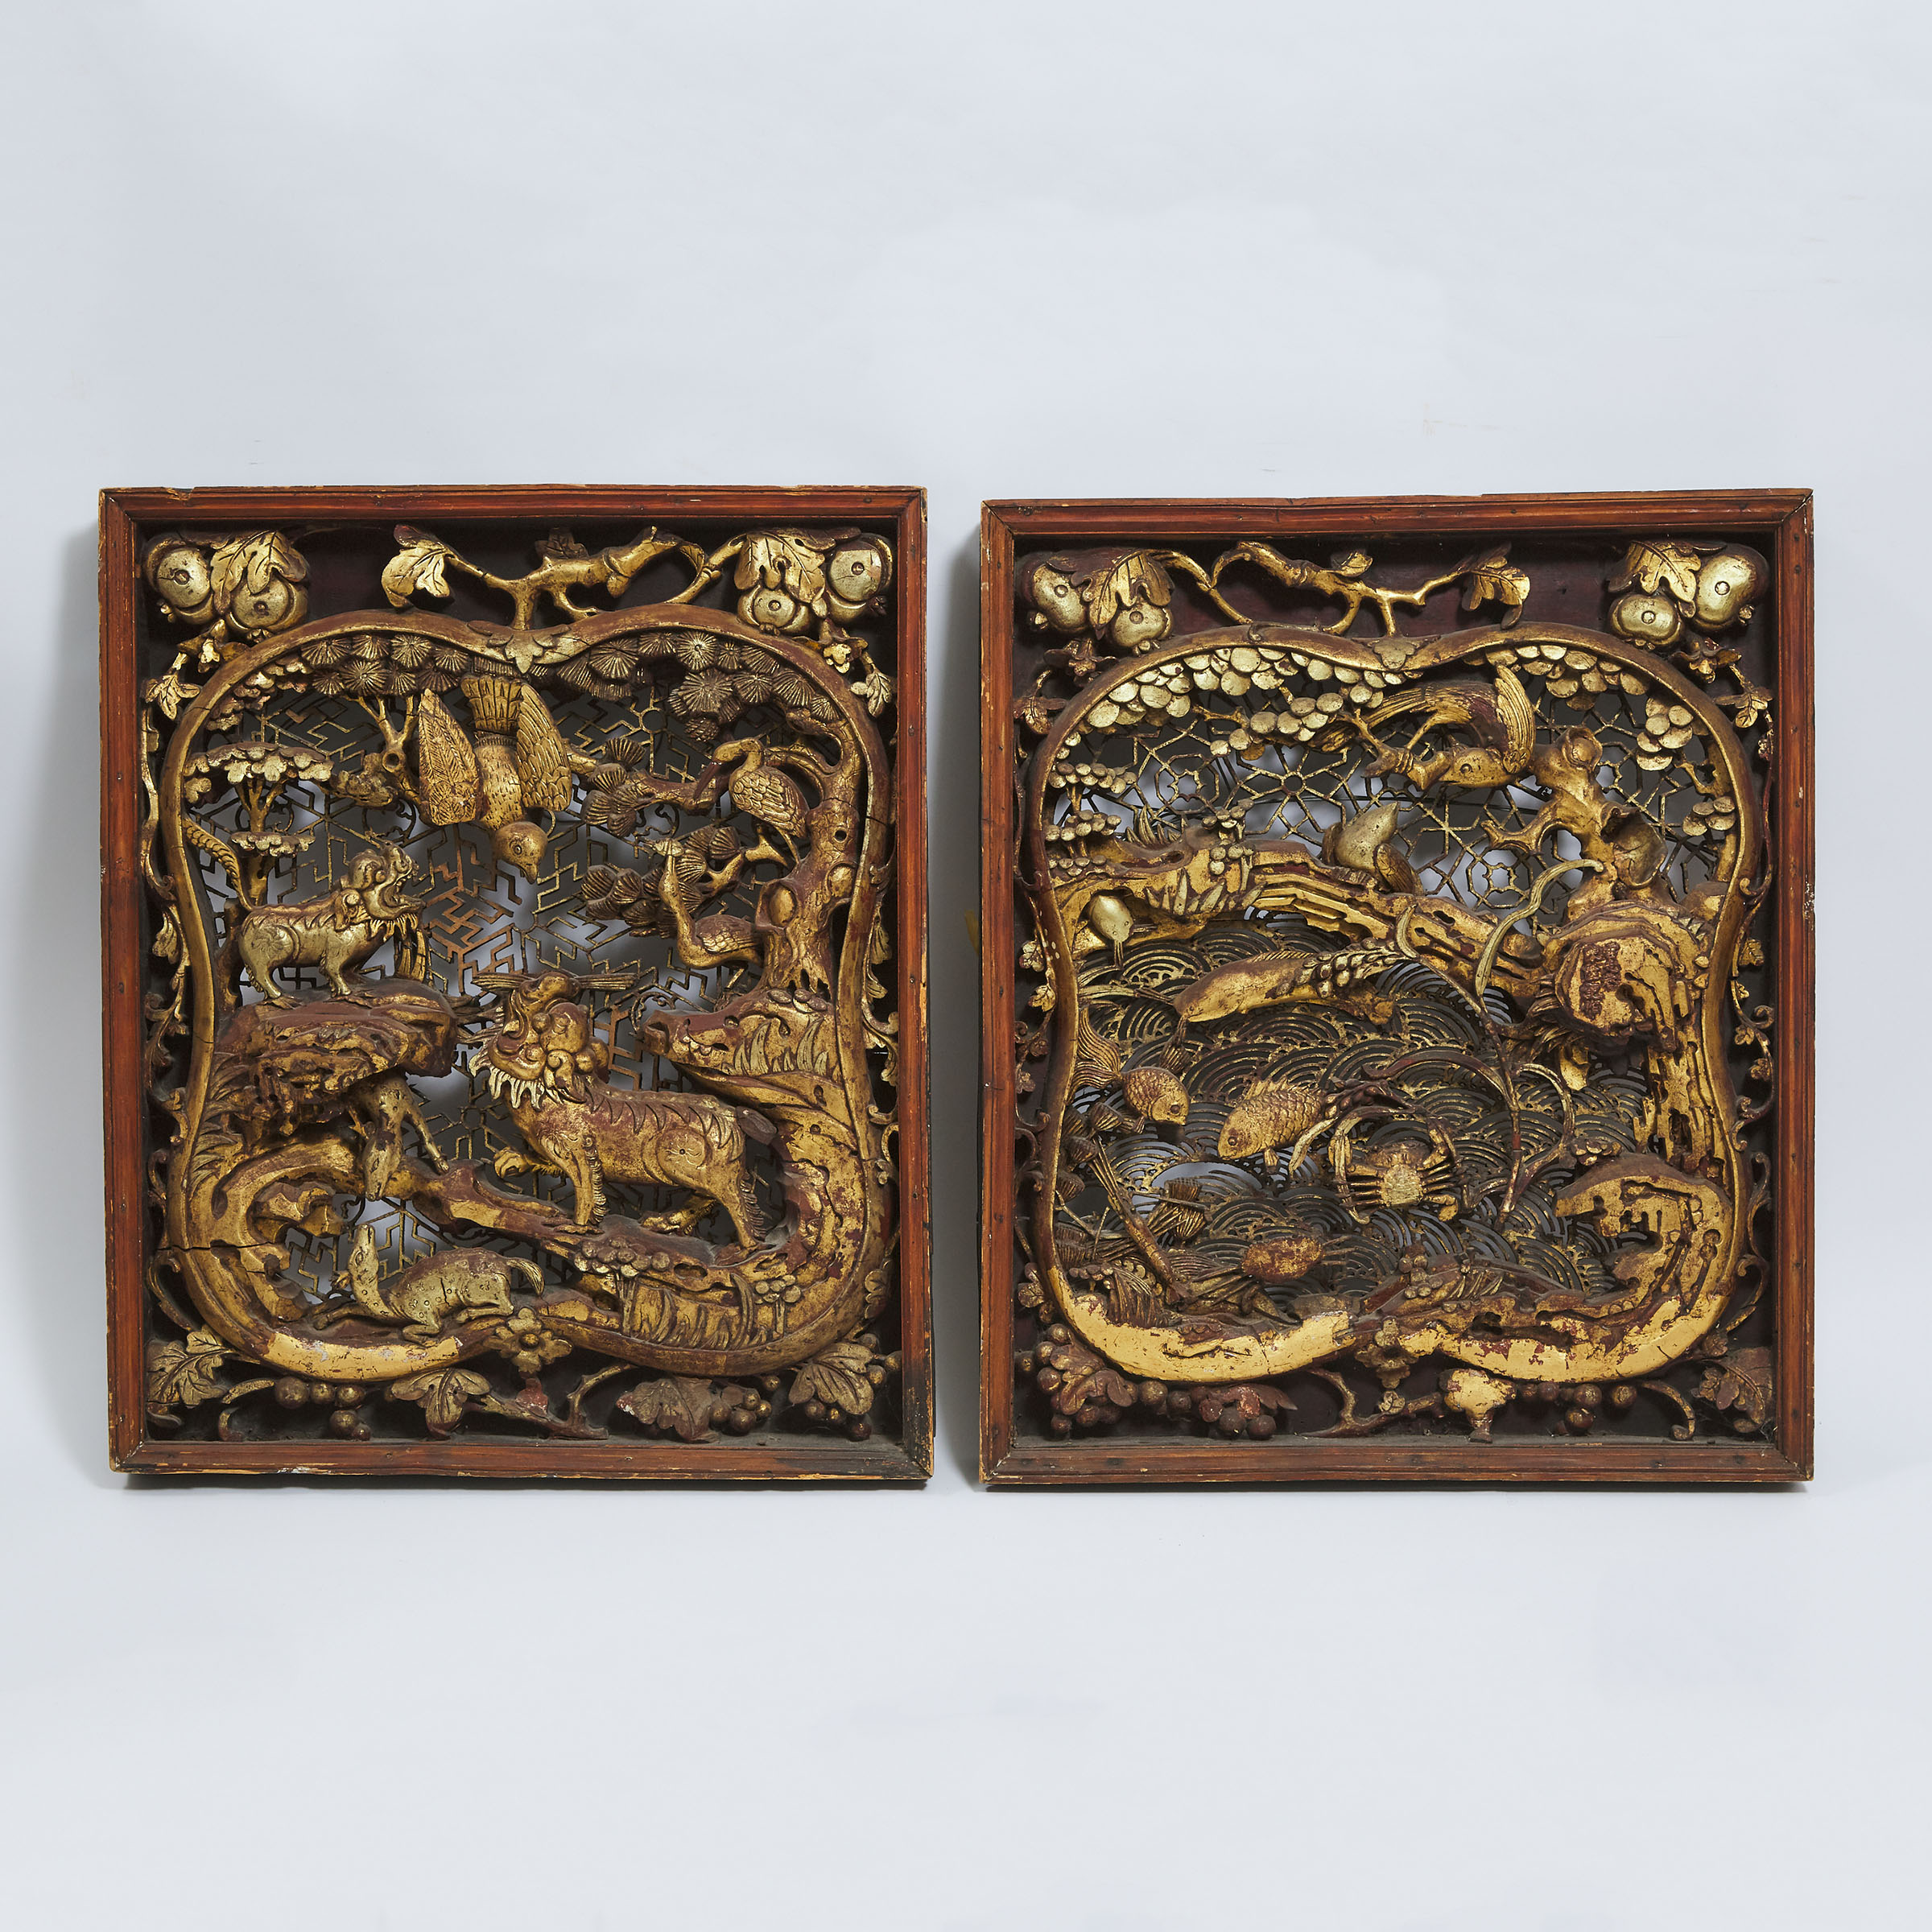 A Pair of Chinese Carved Gilt Wood Panels, Yunzouxiang Chen Shengji Mark, Jiaqing Period, Early 19th Century